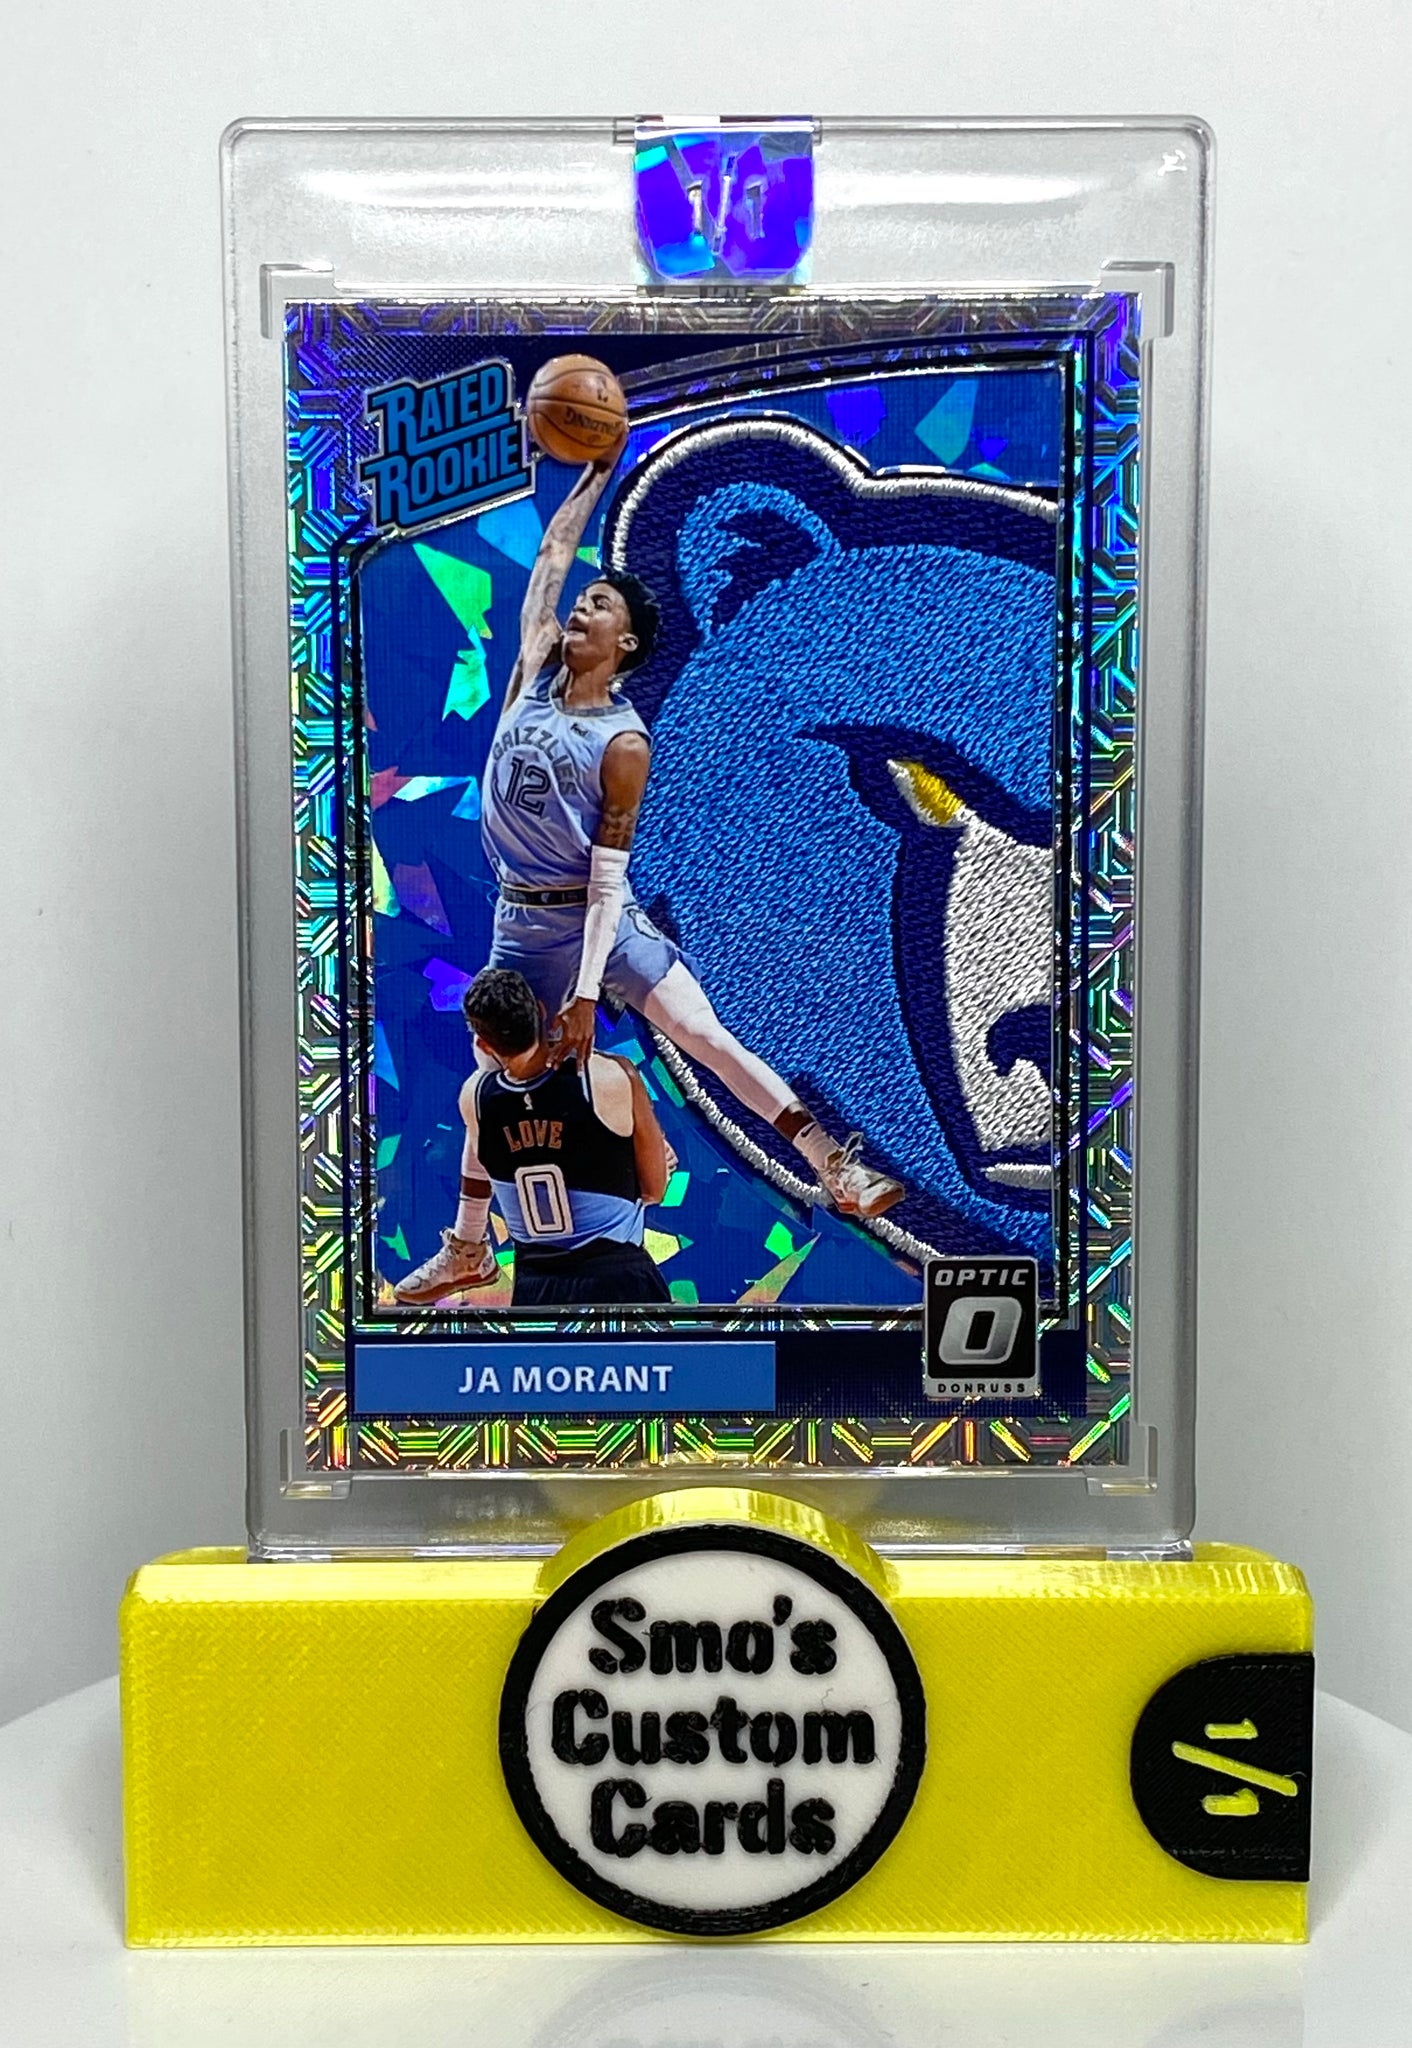 Ja Morant The Dunk Optic Rated Rookie Silver Mojo Grizzlies Patch 1/1